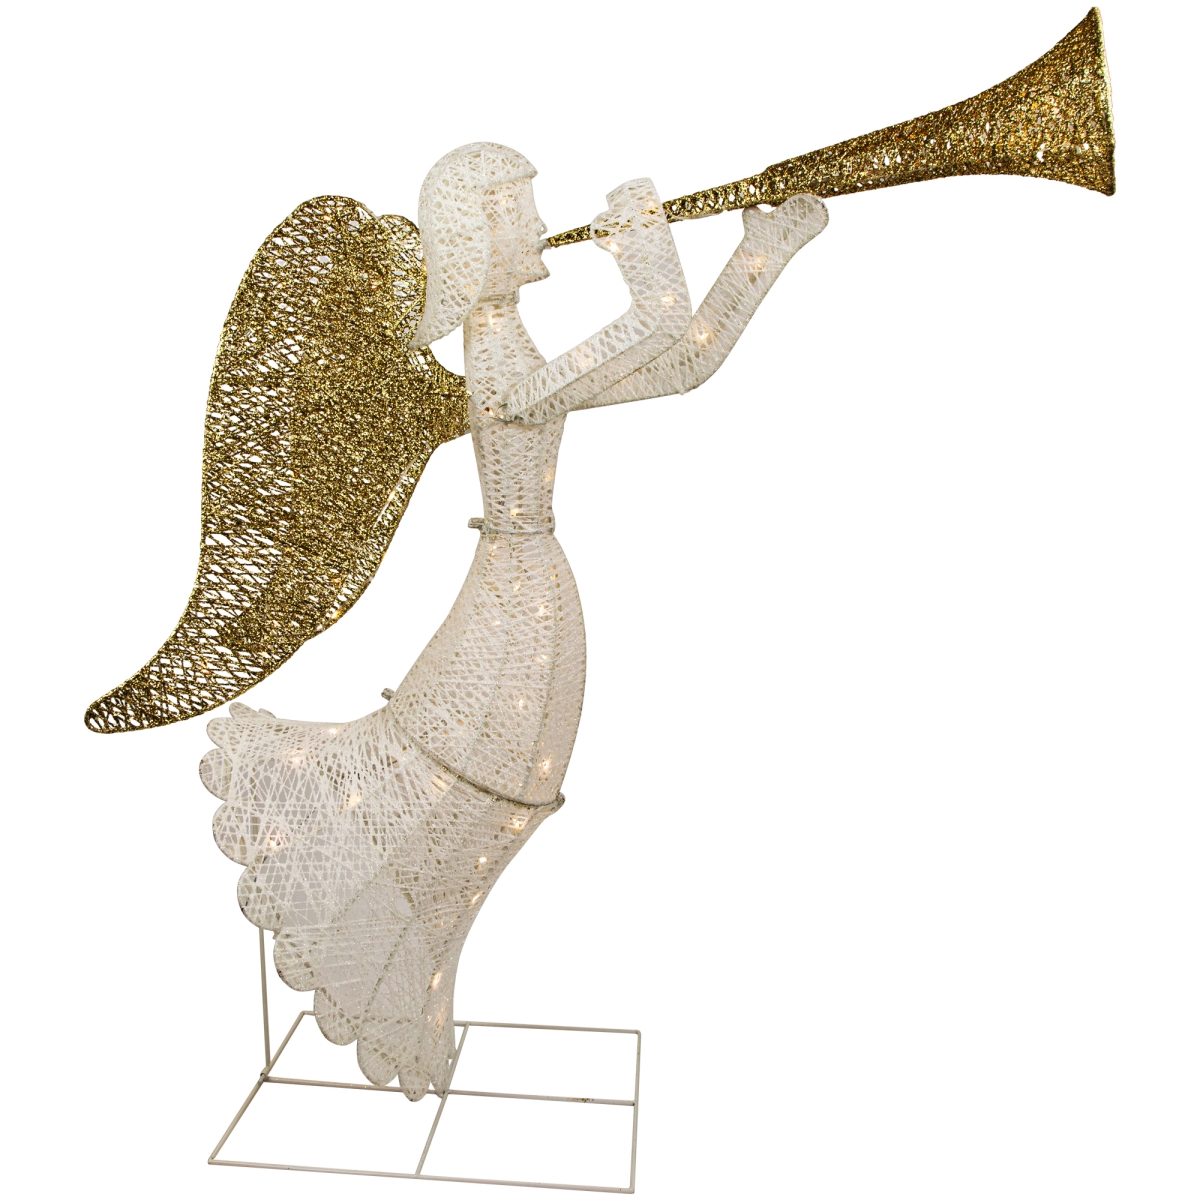 Picture of Northlight 35686108 48 in. LED Lighted Gold & Silver Trumpeting Angel Outdoor Christmas Outdoor Decoration